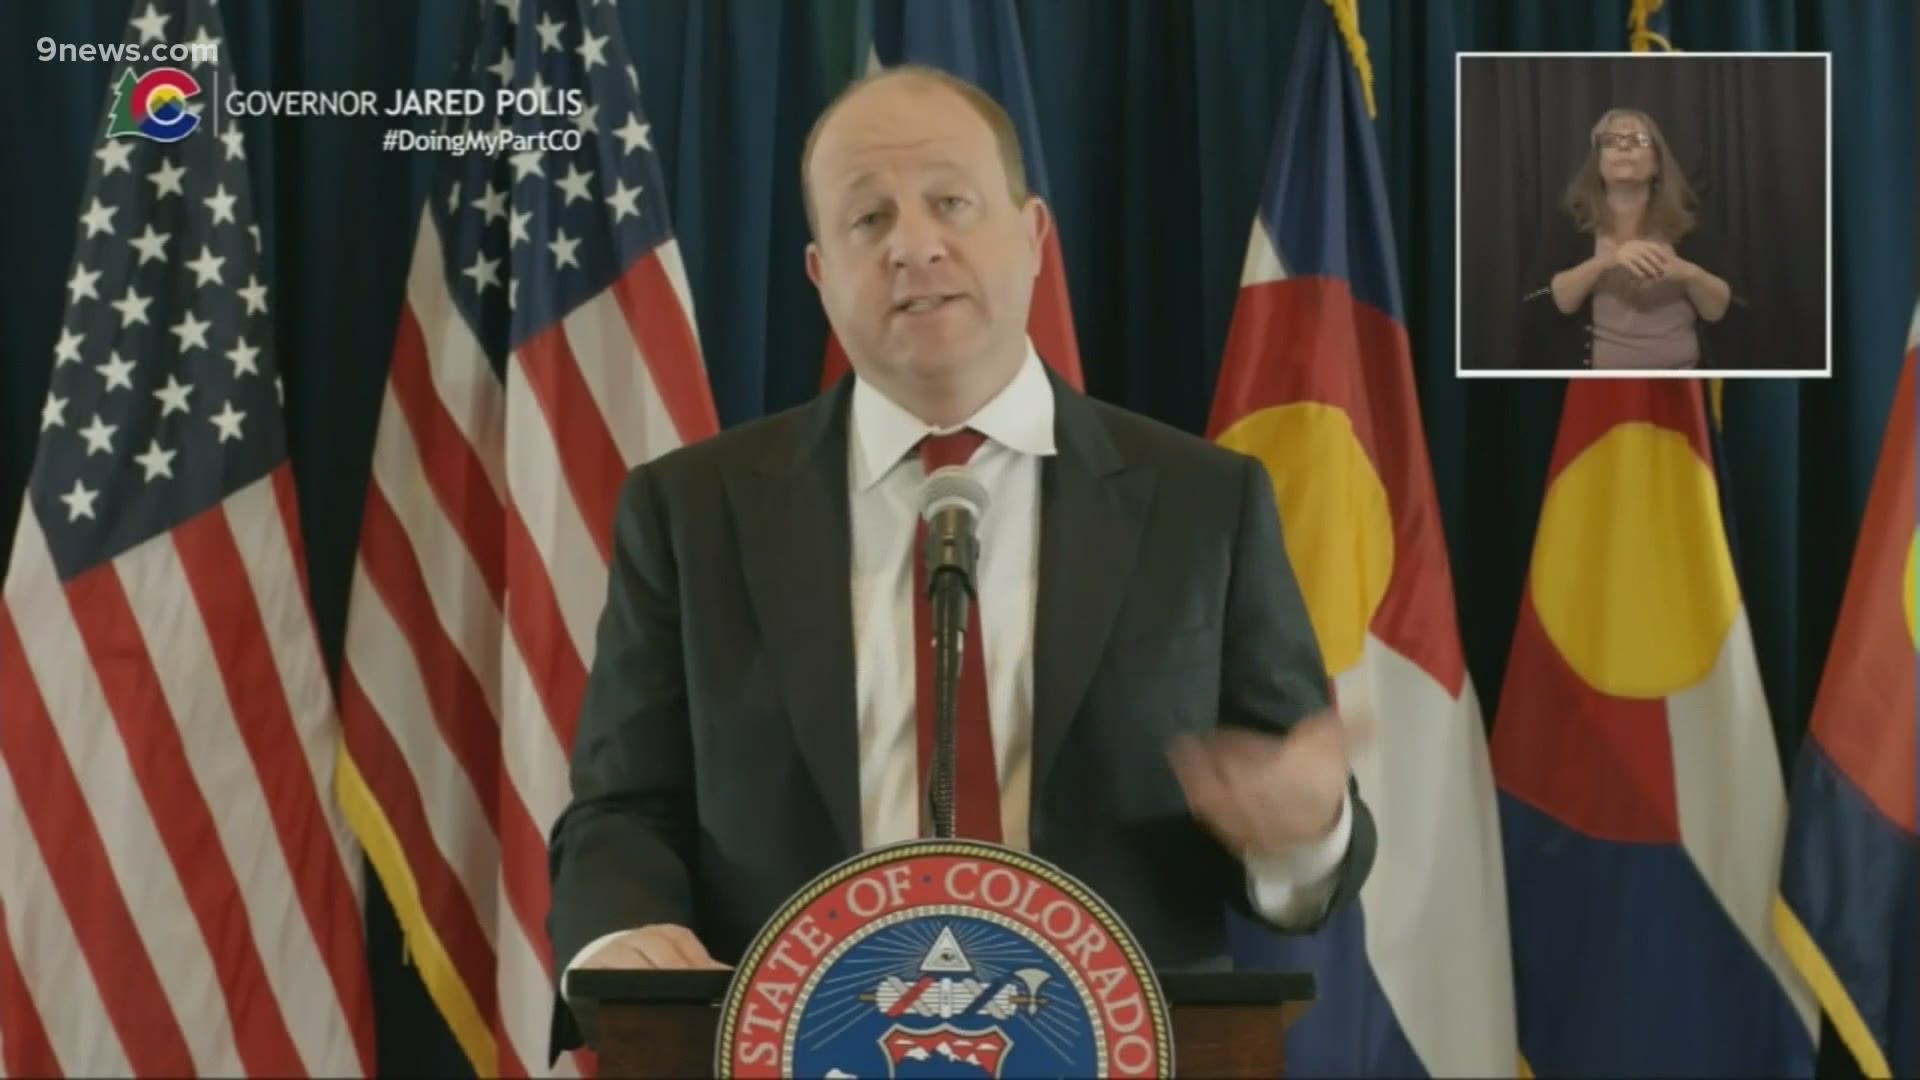 Gov. Jared Polis urged everyone to continue wearing masks and practice social distancing with the upcoming 4th of July holiday.